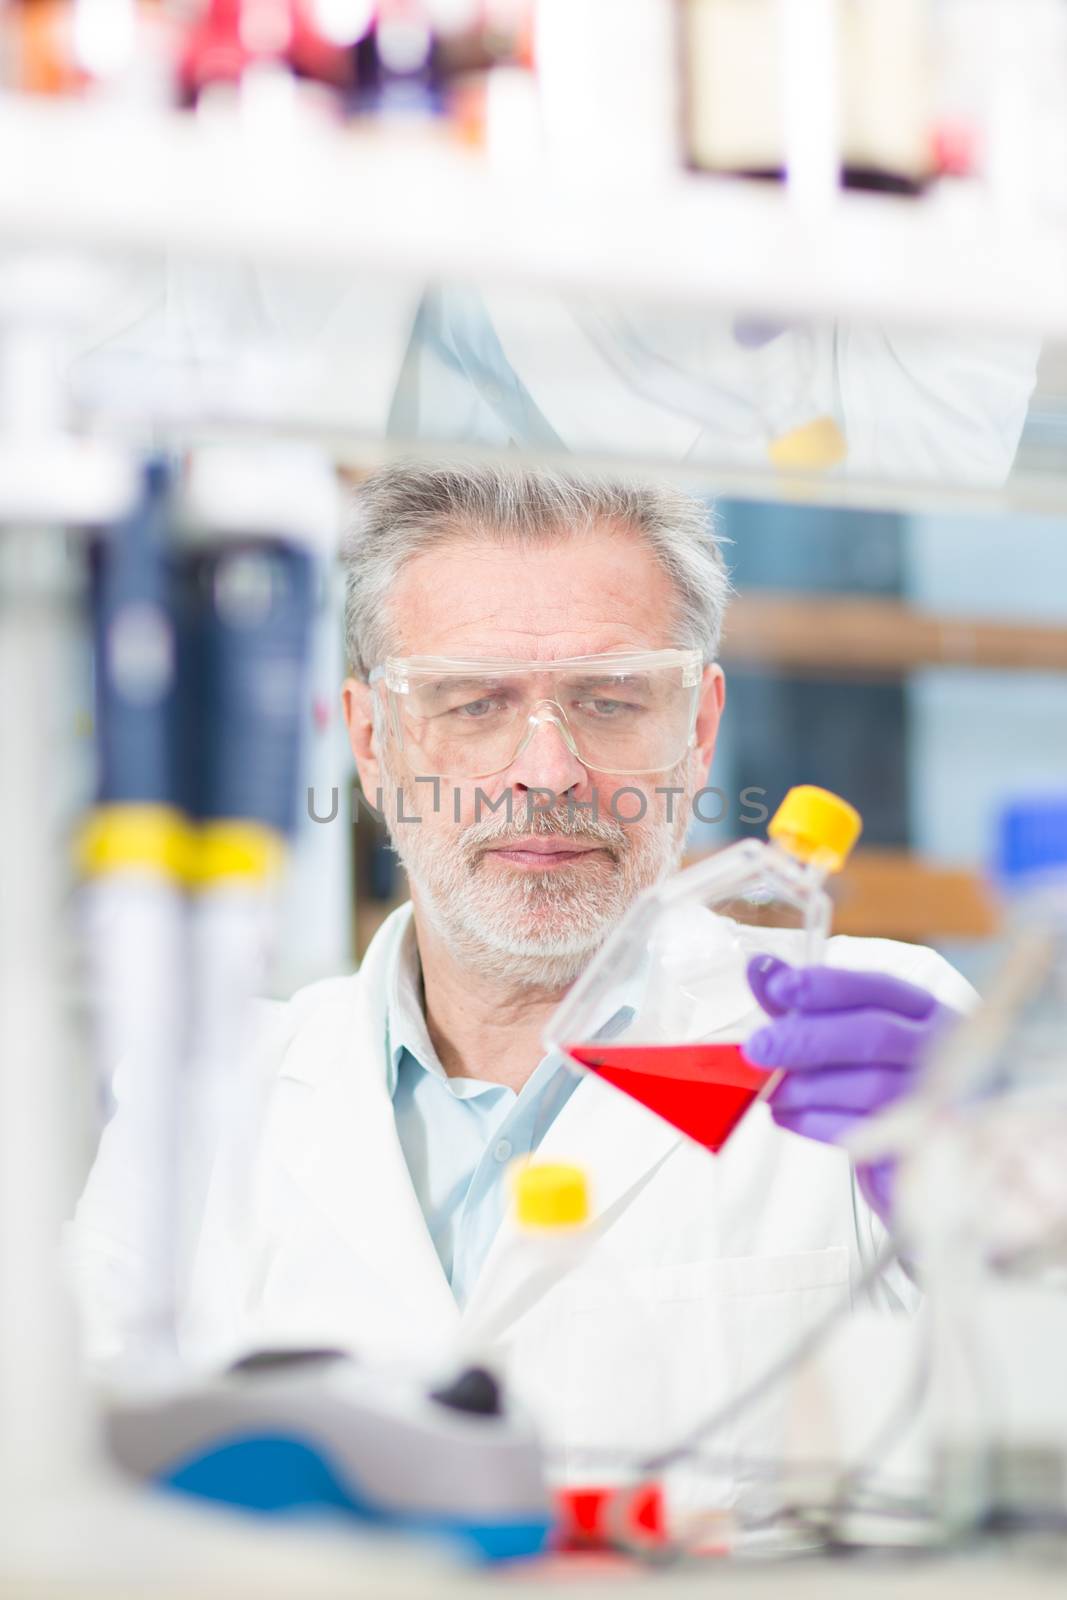 Life scientist researching in laboratory. Life sciences study living organisms on the level of microorganisms, viruses, human, animal and plant cells, genes, DNA...